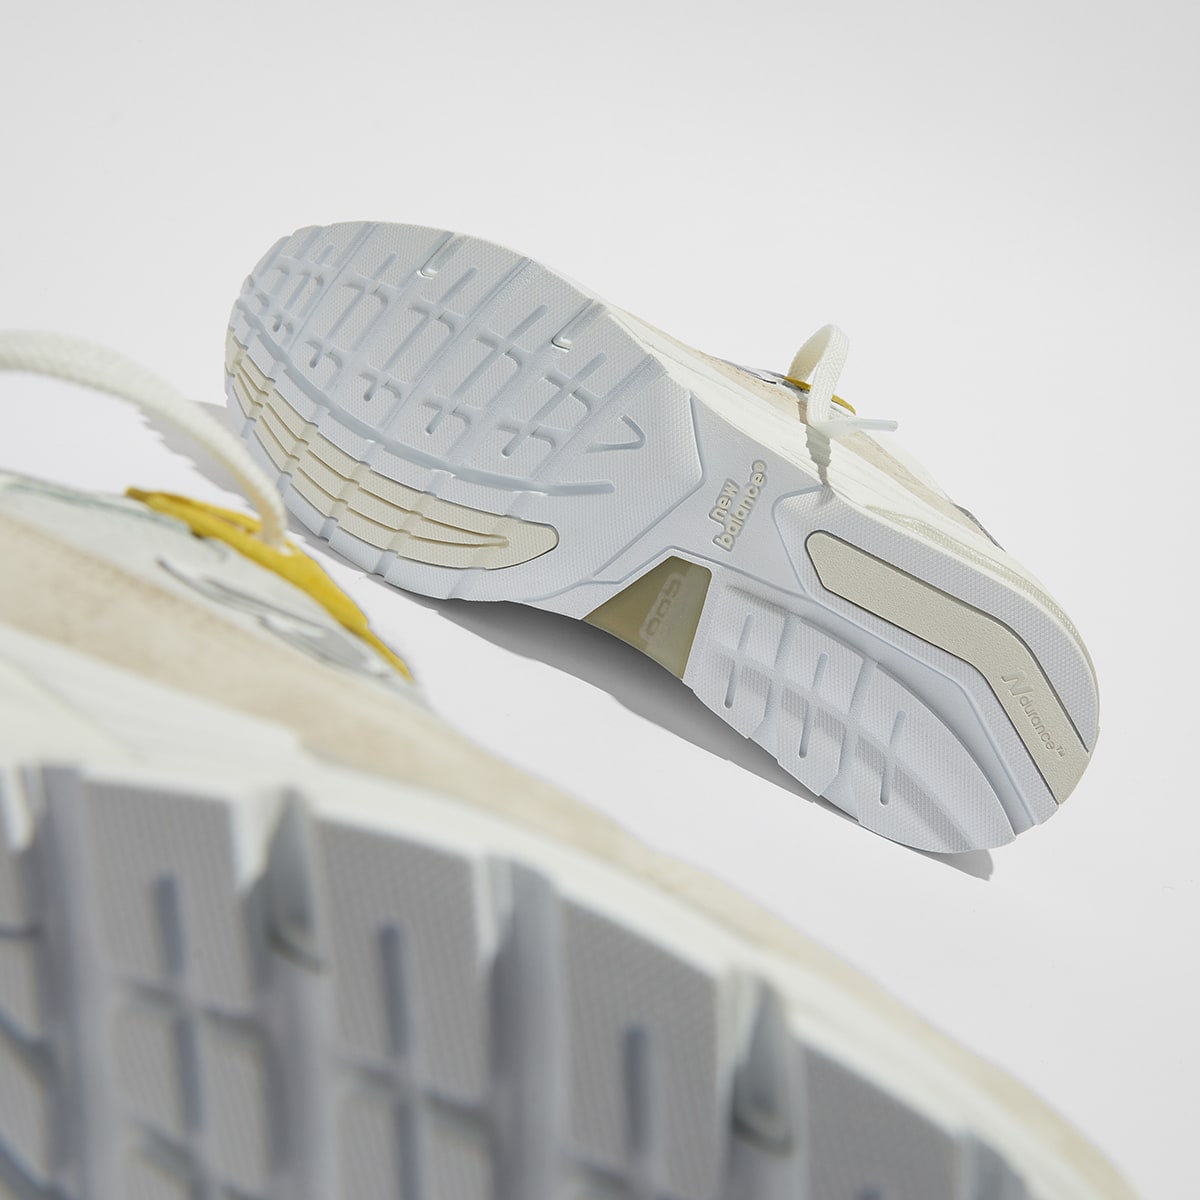 New Balance x Paperboy 992 (Fried Egg) | END. Launches